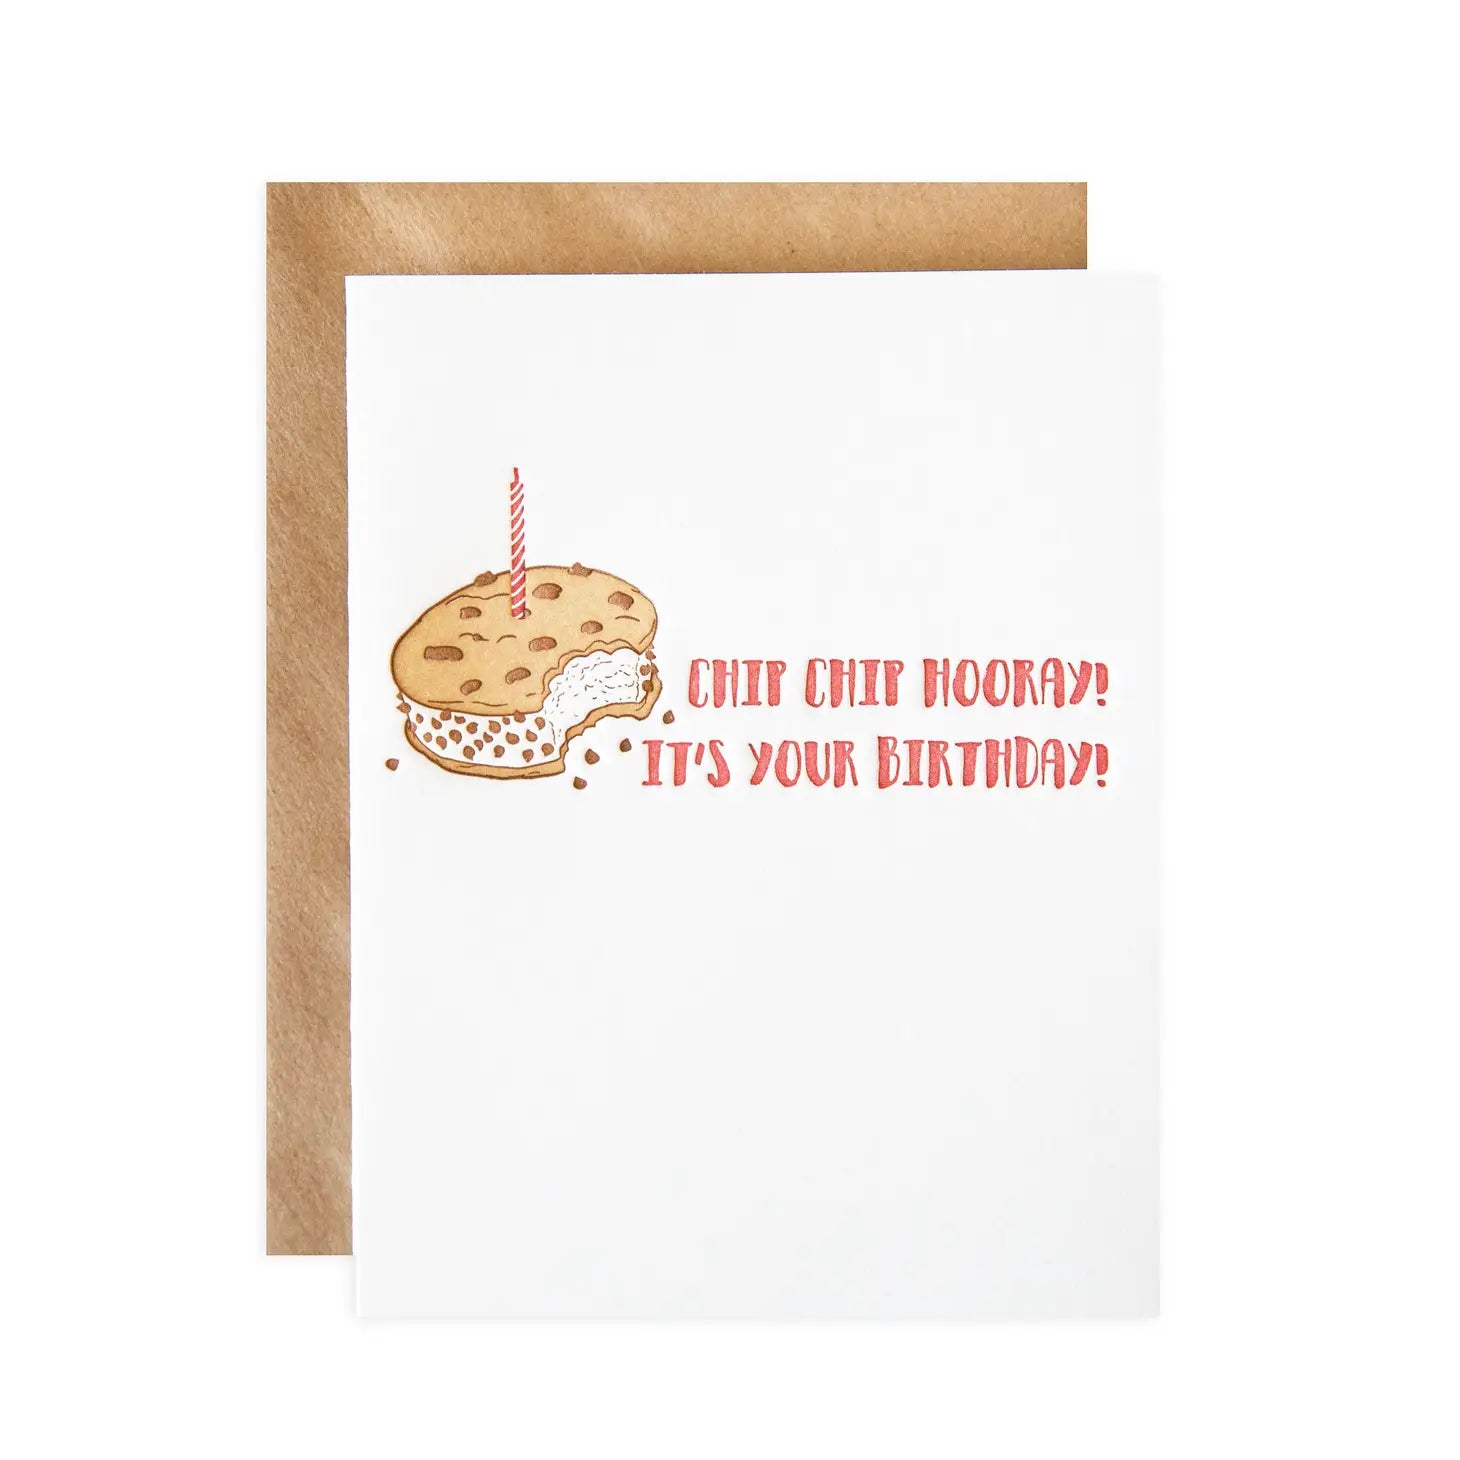 Chocolate chip cookie ice cream sandwich birthday greeting card -- reads "Chip Chip Hooray! It's Your Birthday!" 